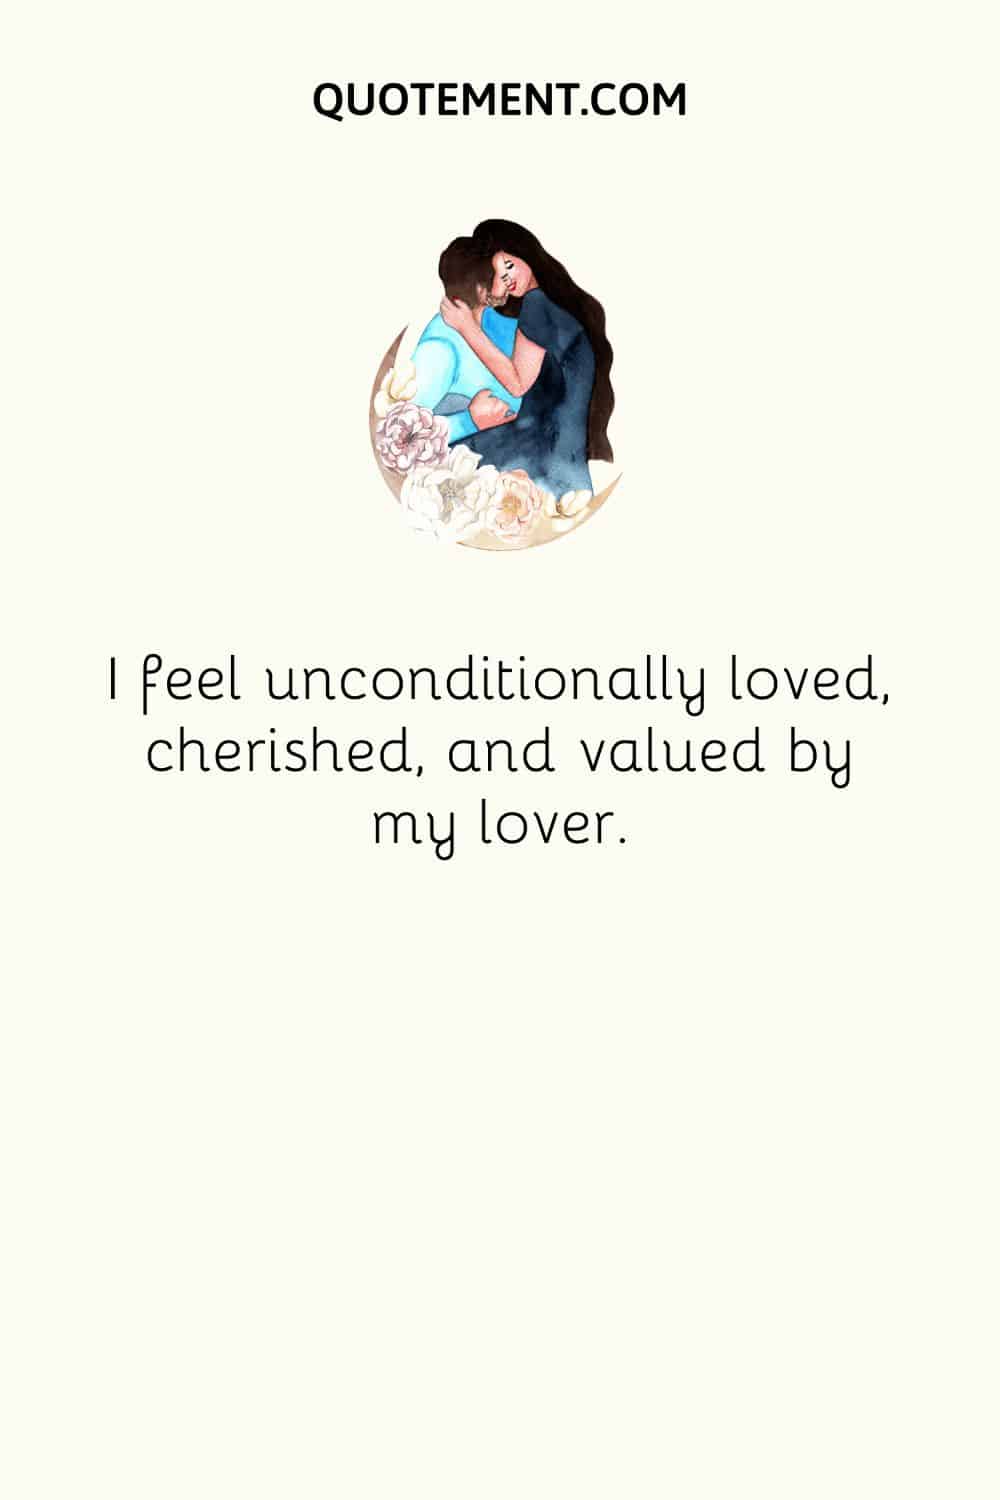 I feel unconditionally loved, cherished, and valued by my lover.